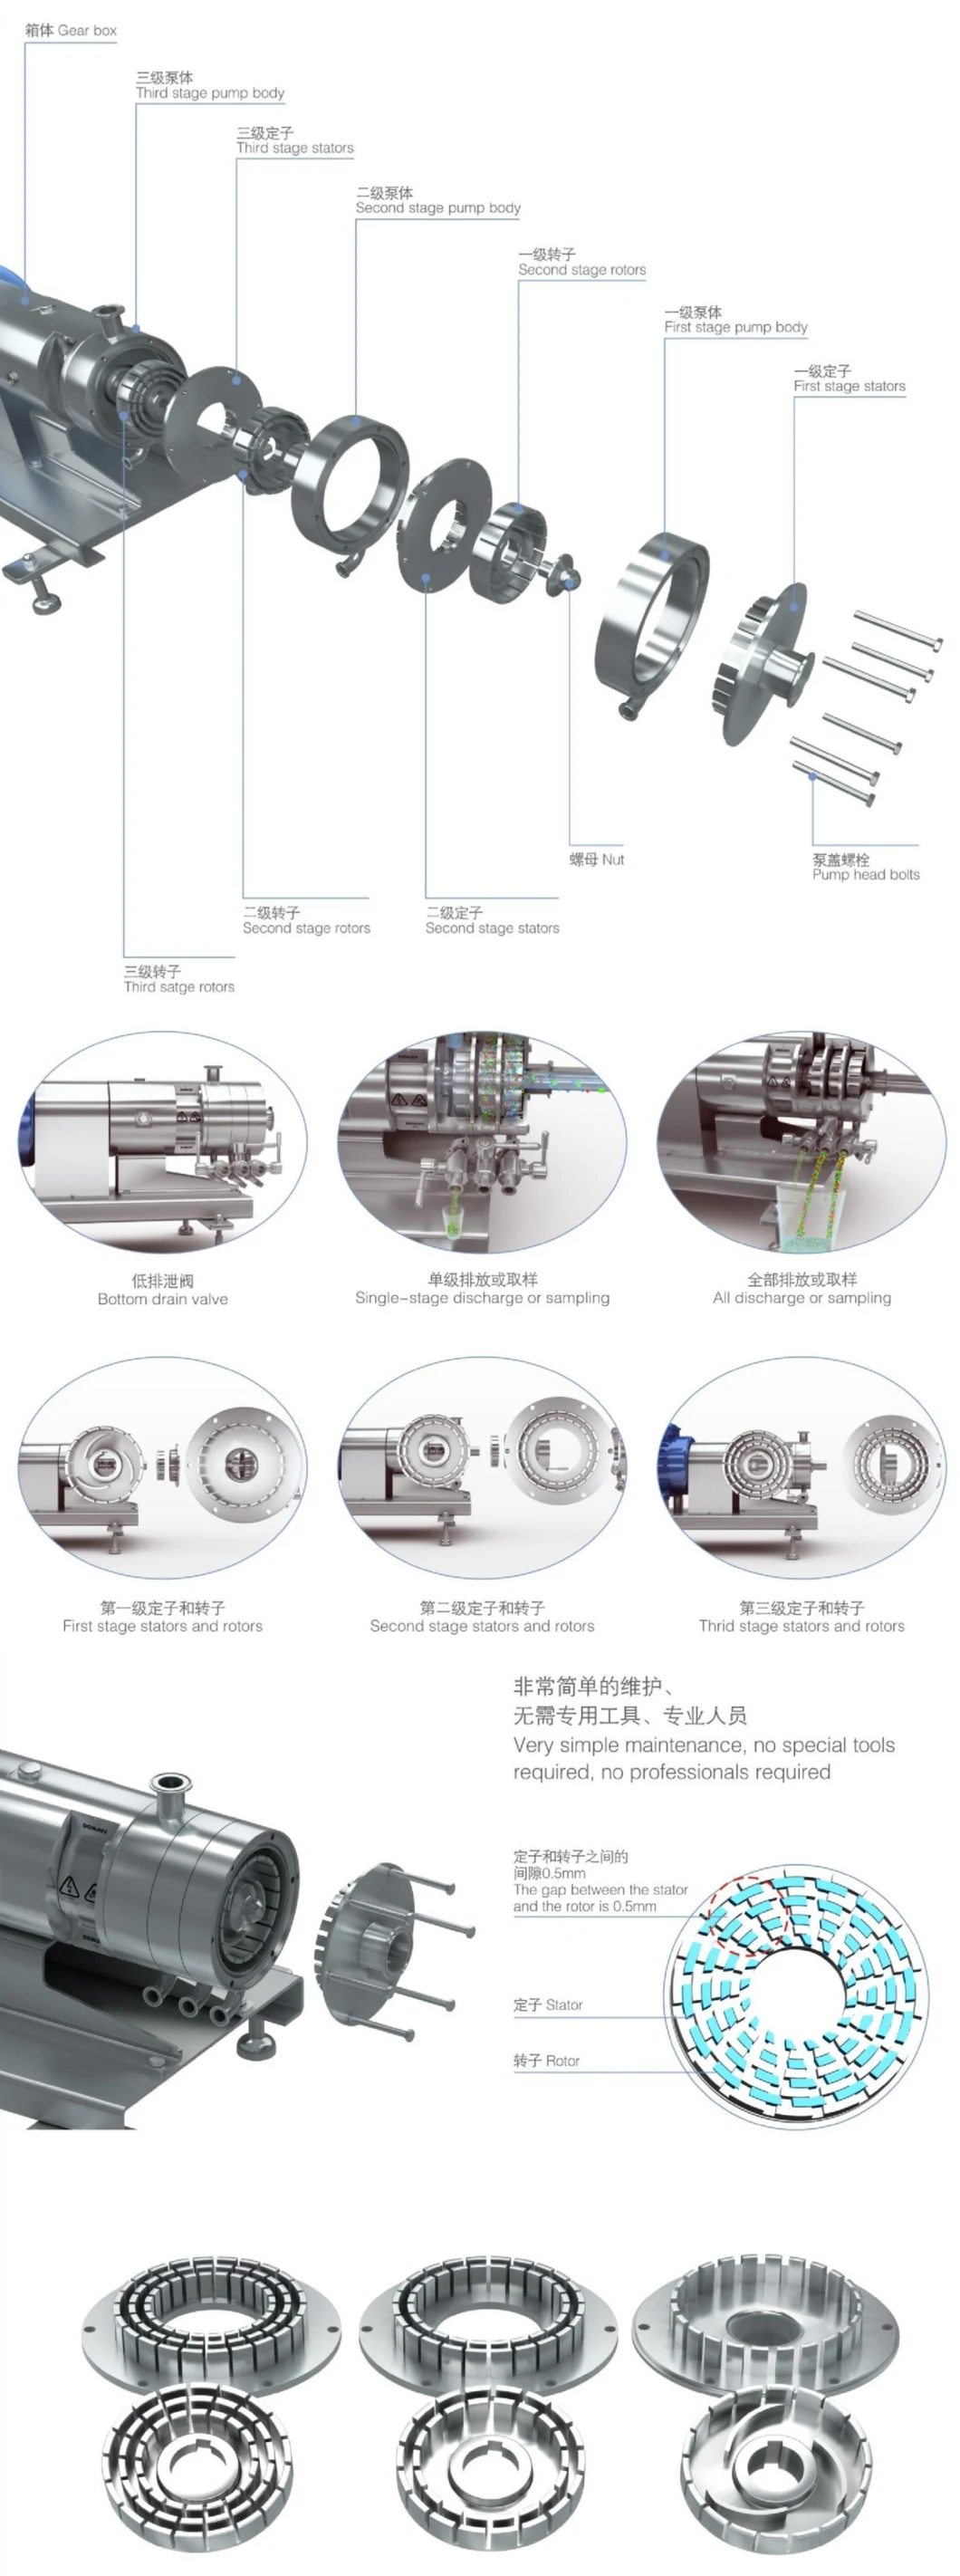 Sanitary Efficiency Homogeneous Emulsifying High Cleanliness Mixing Multi-Stage Pump Jz3 Series